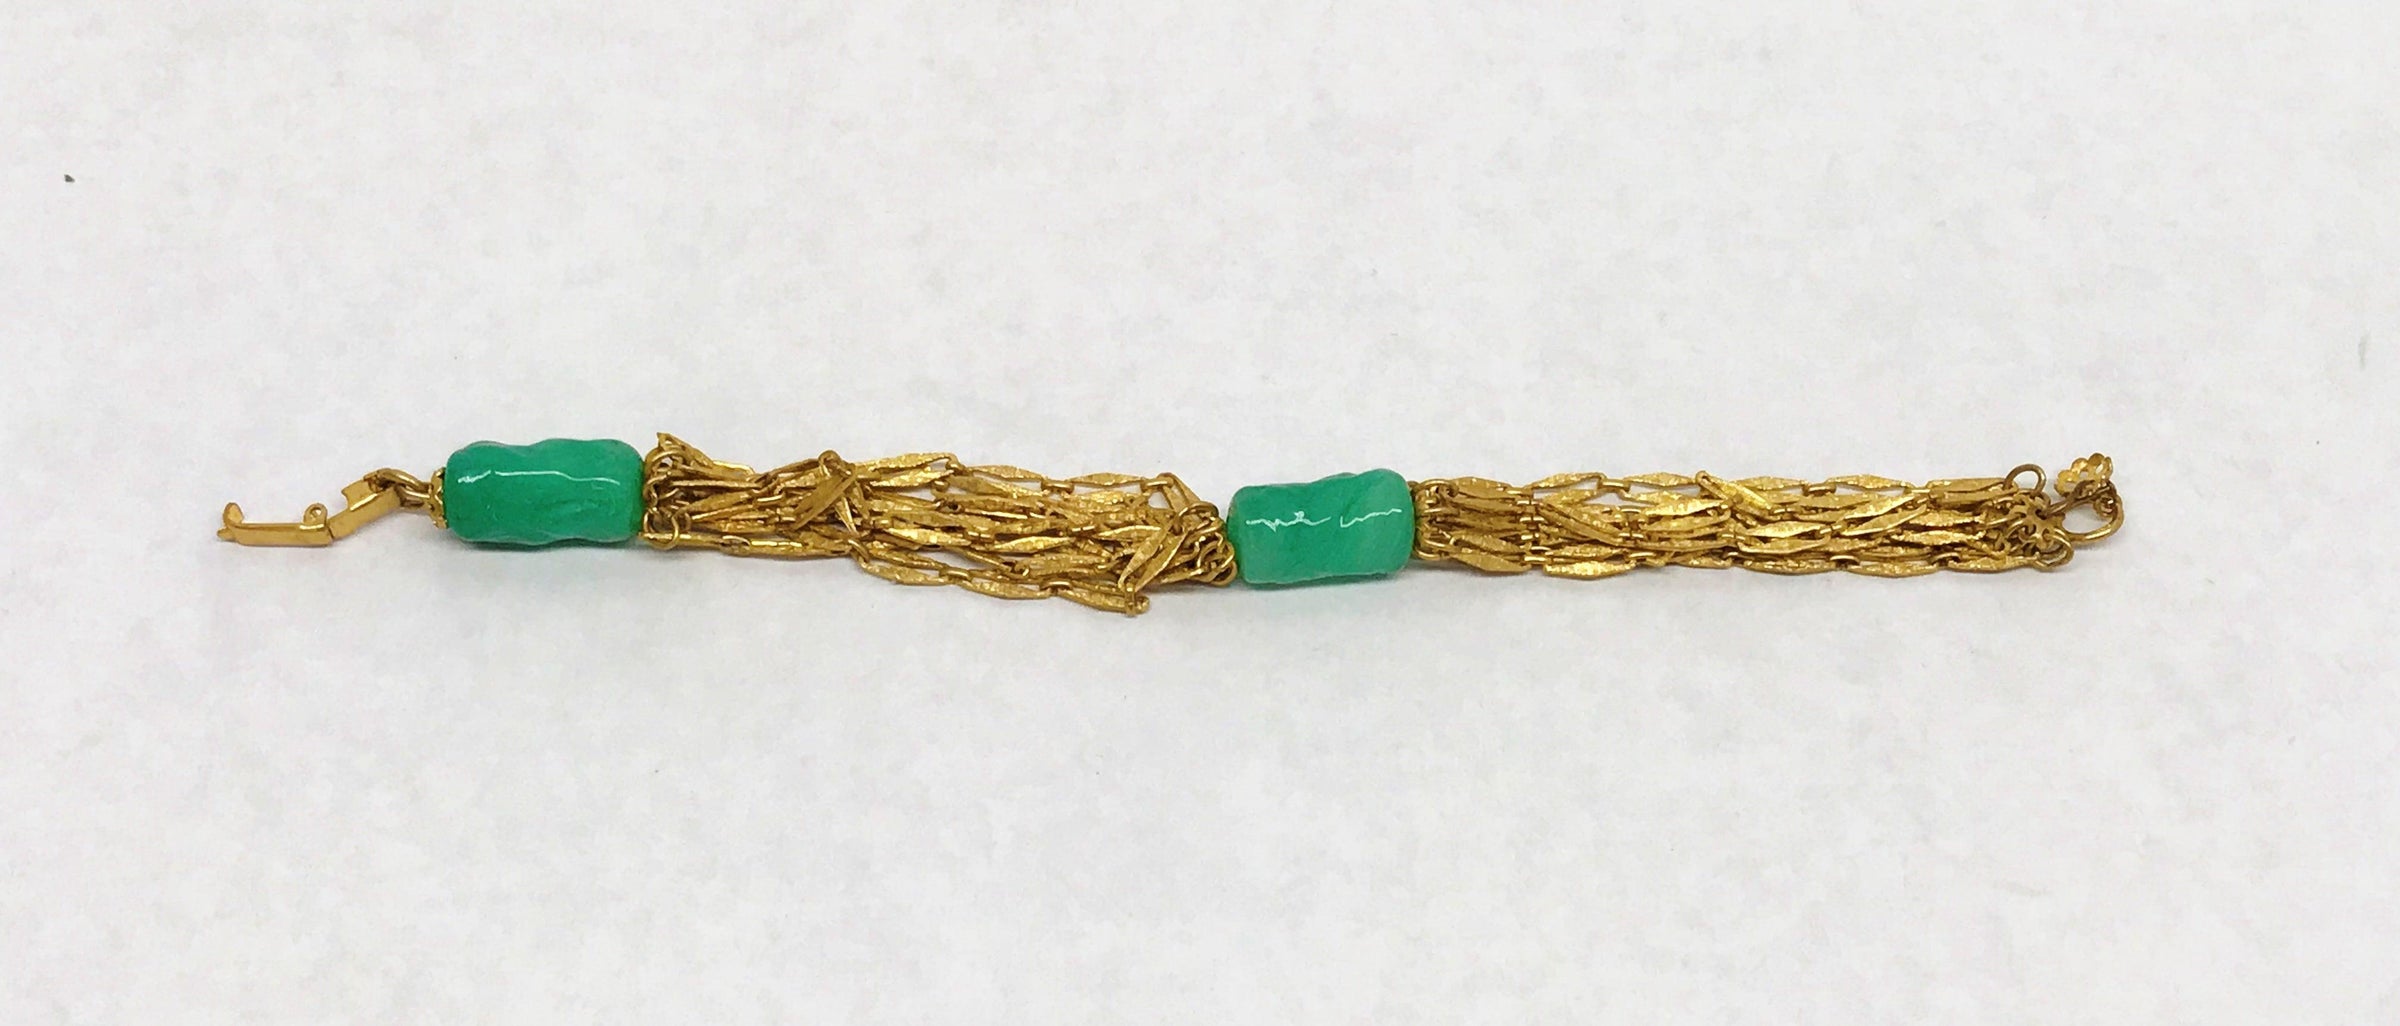 Vintage 8 Strand Gold Tone Bracelet With 2 Green Glass Beads - Hers and His Treasures